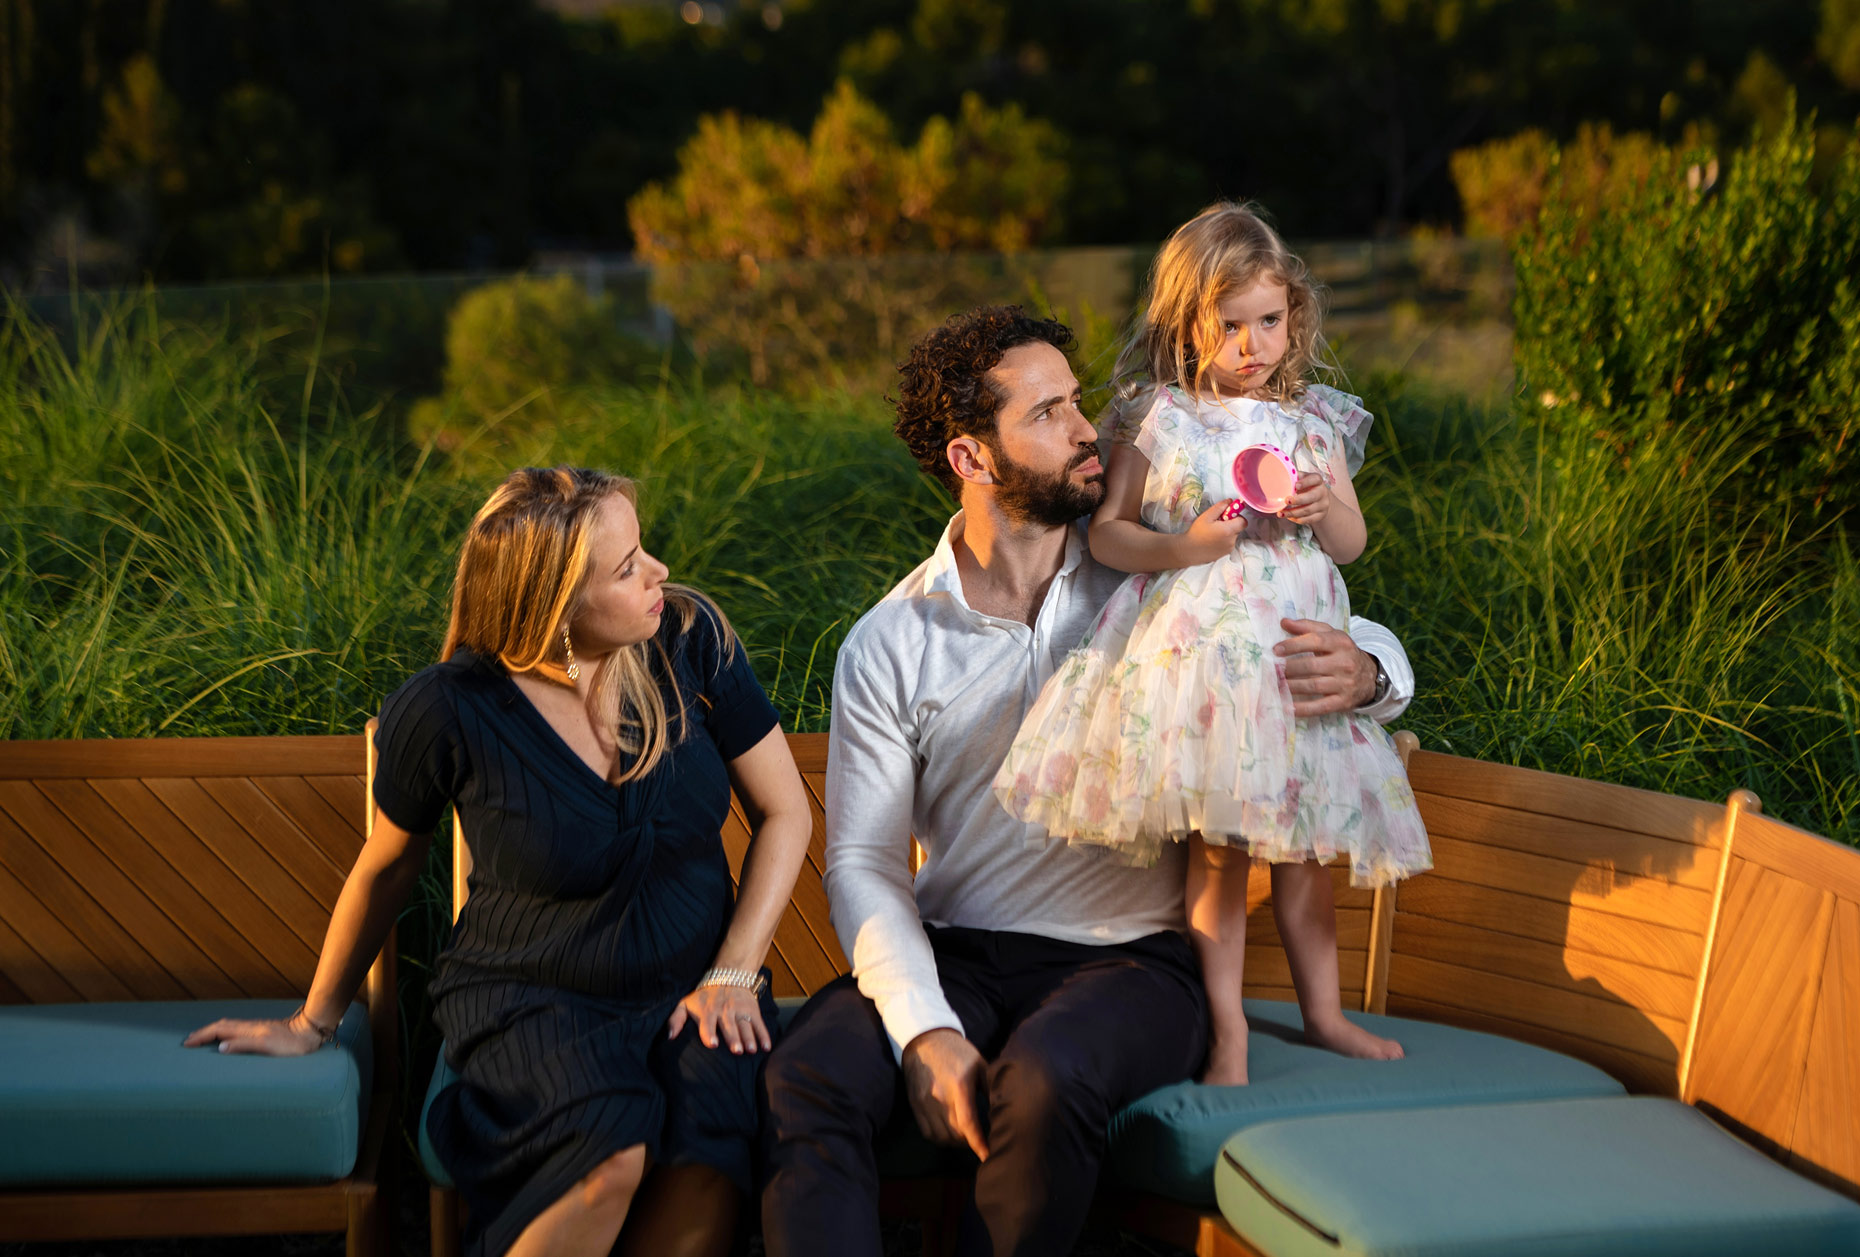 Athens riviera family photos | Family session in Athens Riviera